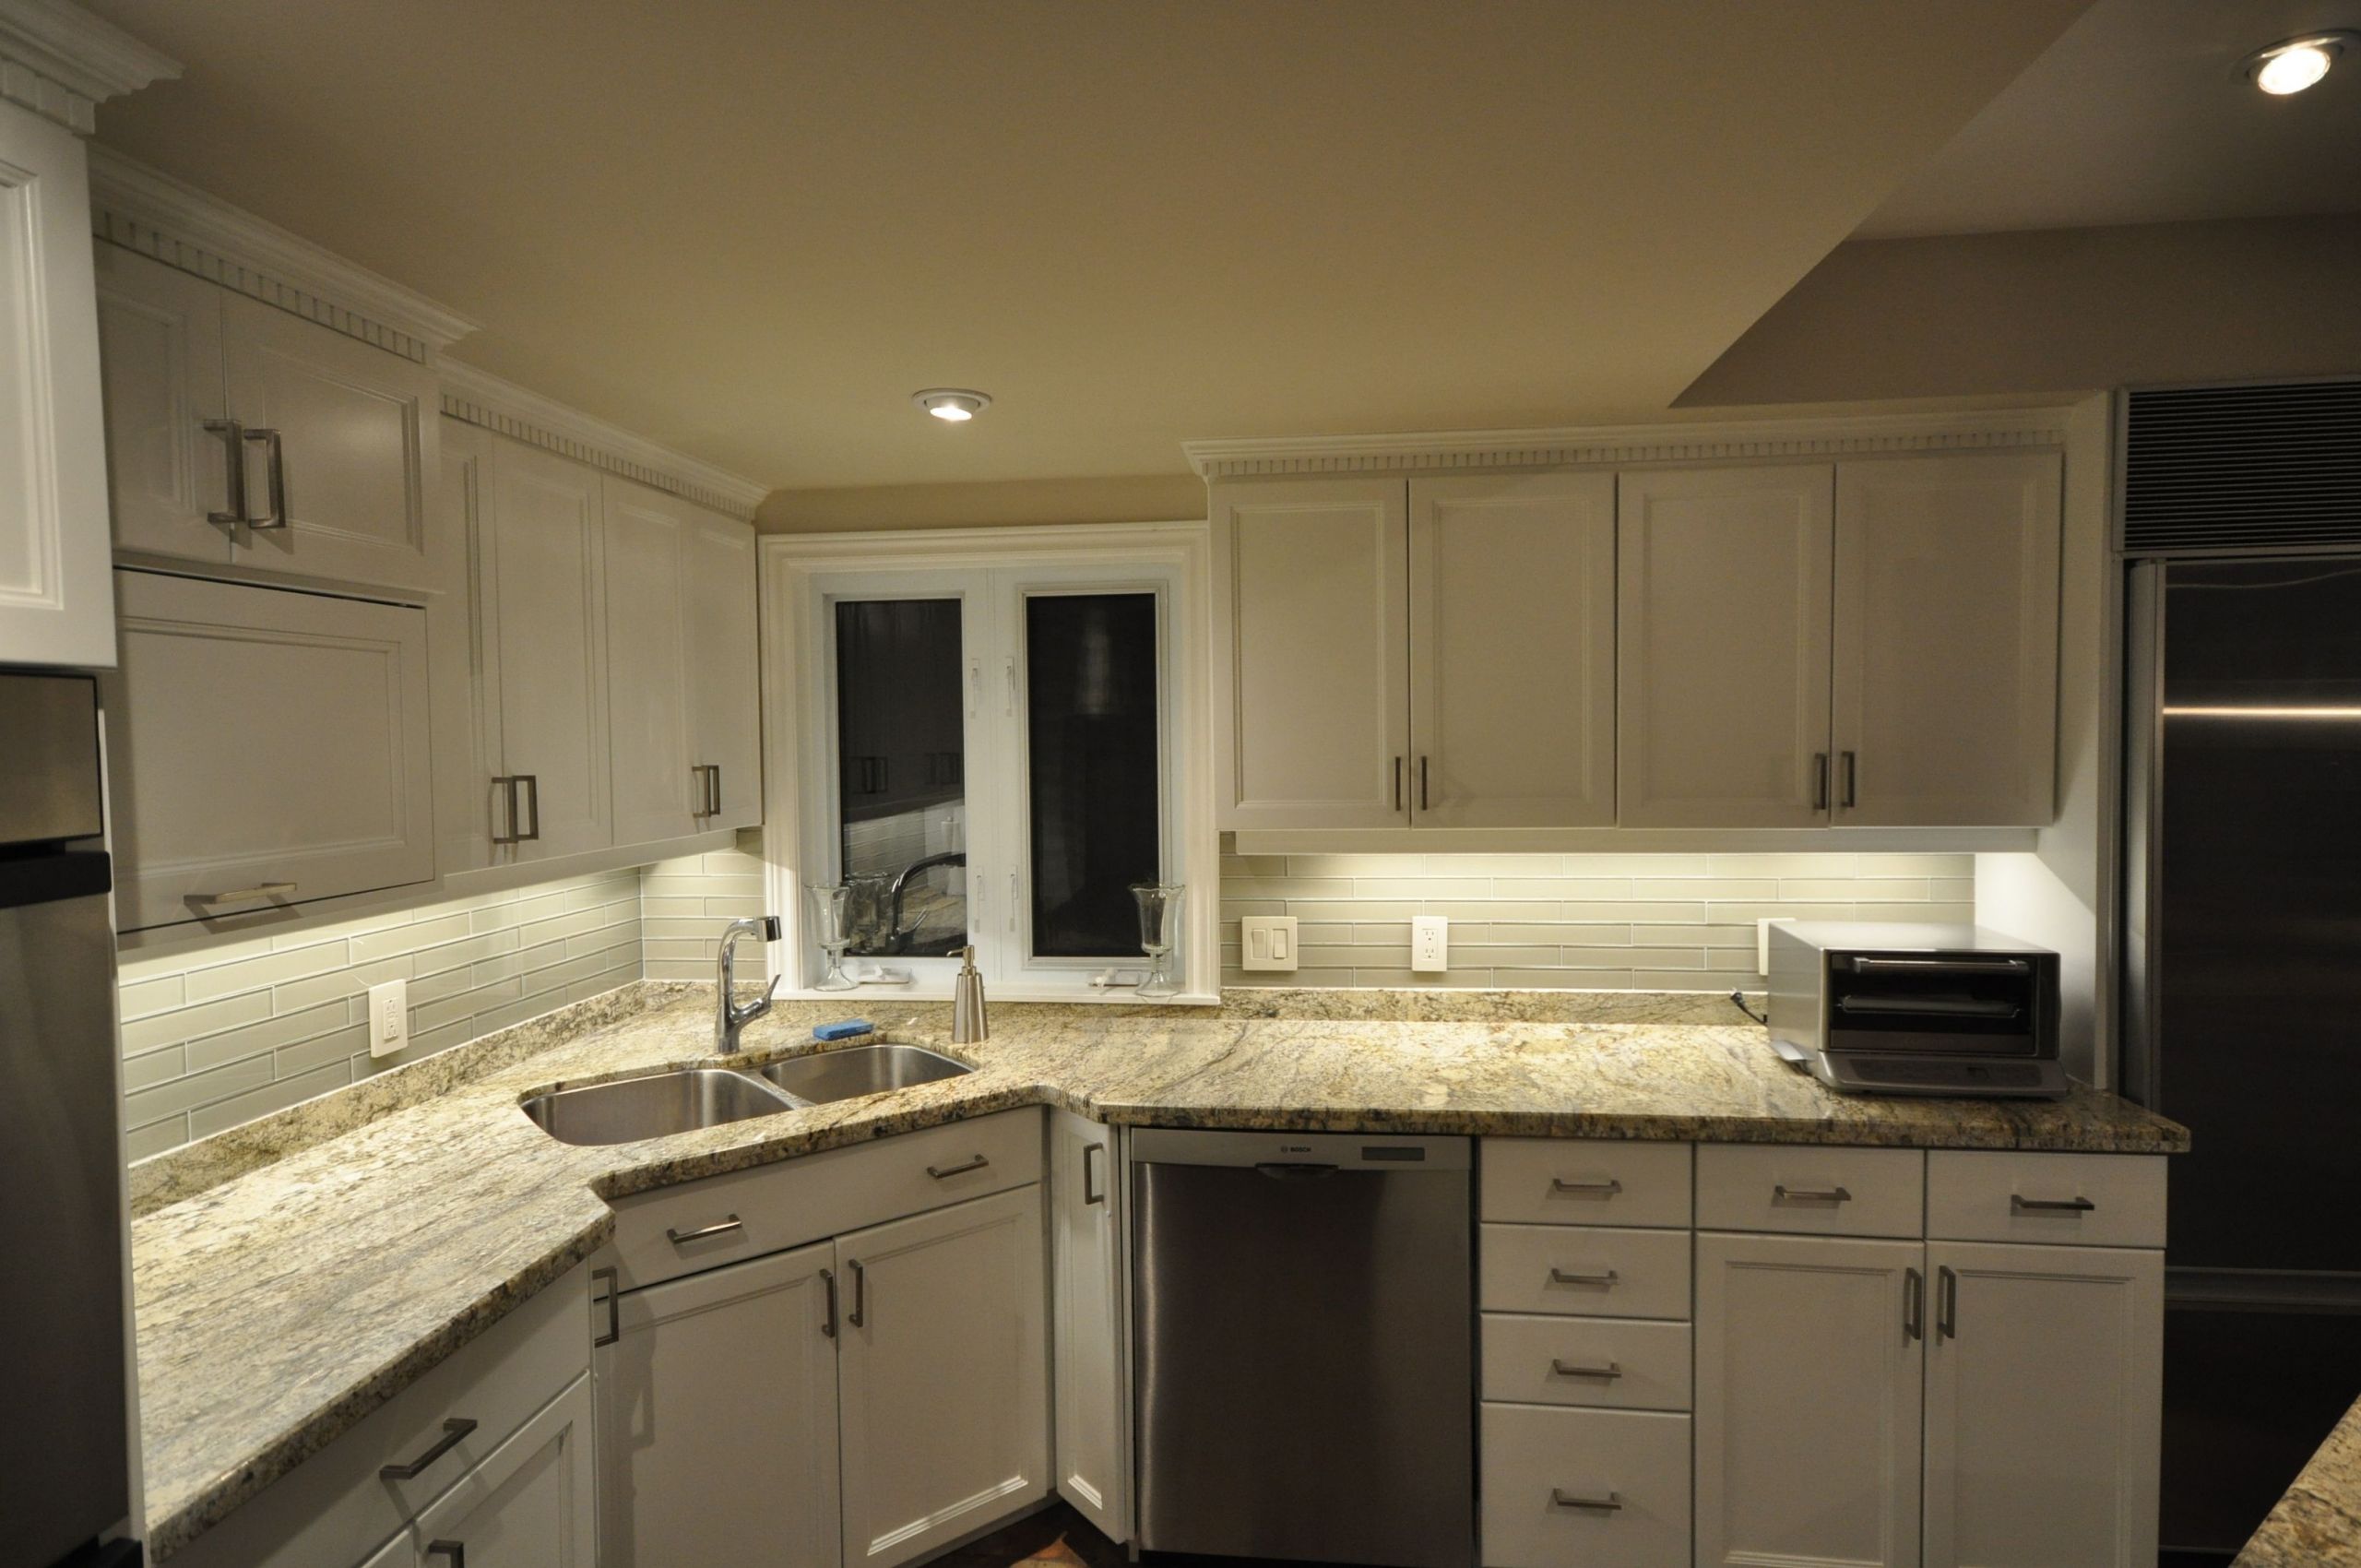 Led Under Kitchen Cabinet Lights
 Pin on Under cabinet lighting projects